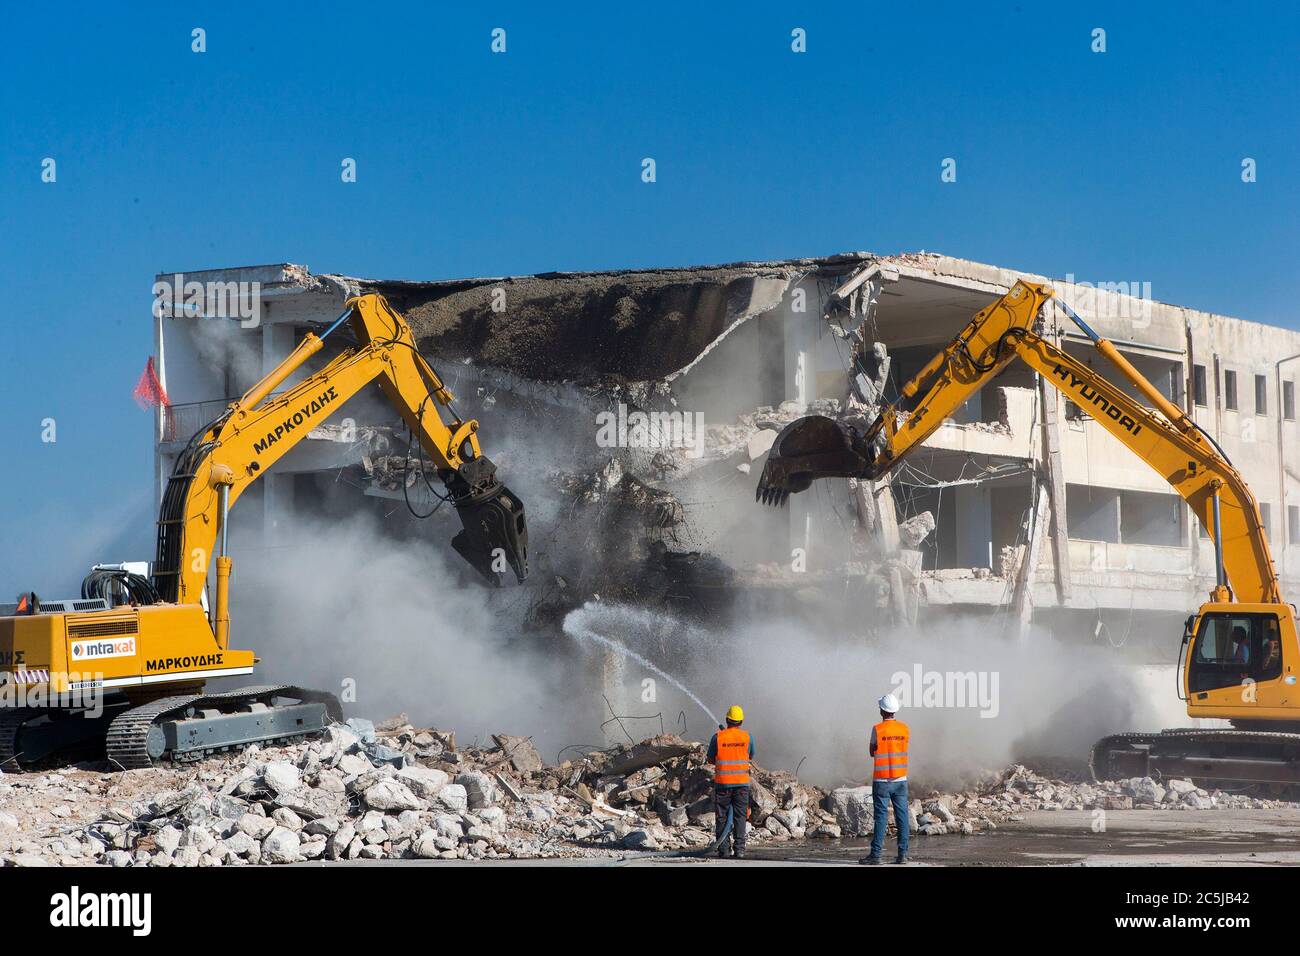 Athens, Greece. 3rd July, 2020. Bulldozers demolish a derelict building at the 'Hellinikon' airport, in Athens, Greece, on July 3, 2020. Greek Prime Minister Kyriakos Mitsotakis welcomed the start of construction works at Athens' former airport 'Hellinikon' on Friday under an emblematic redevelopment project as the 'beginning of a new era' for Greece. Credit: Marios Lolos/Xinhua/Alamy Live News Stock Photo